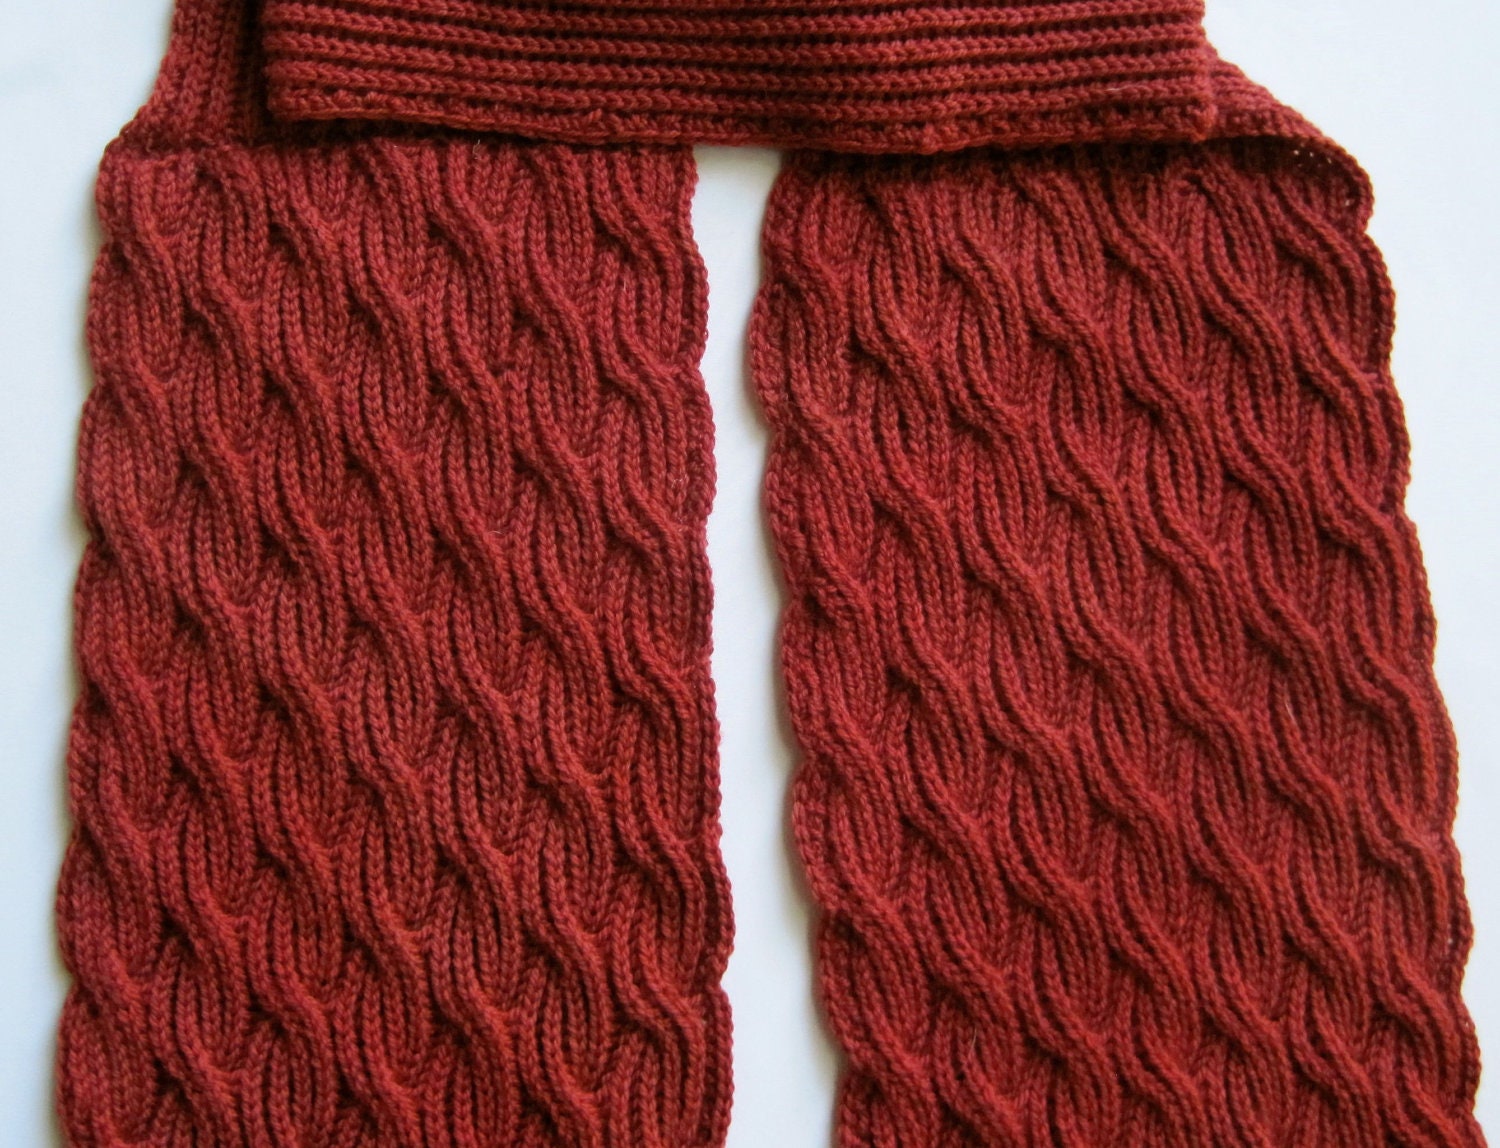 Knit Scarf Pattern: Brioche Cabled Turtleneck Scarf Knitting - Etsy